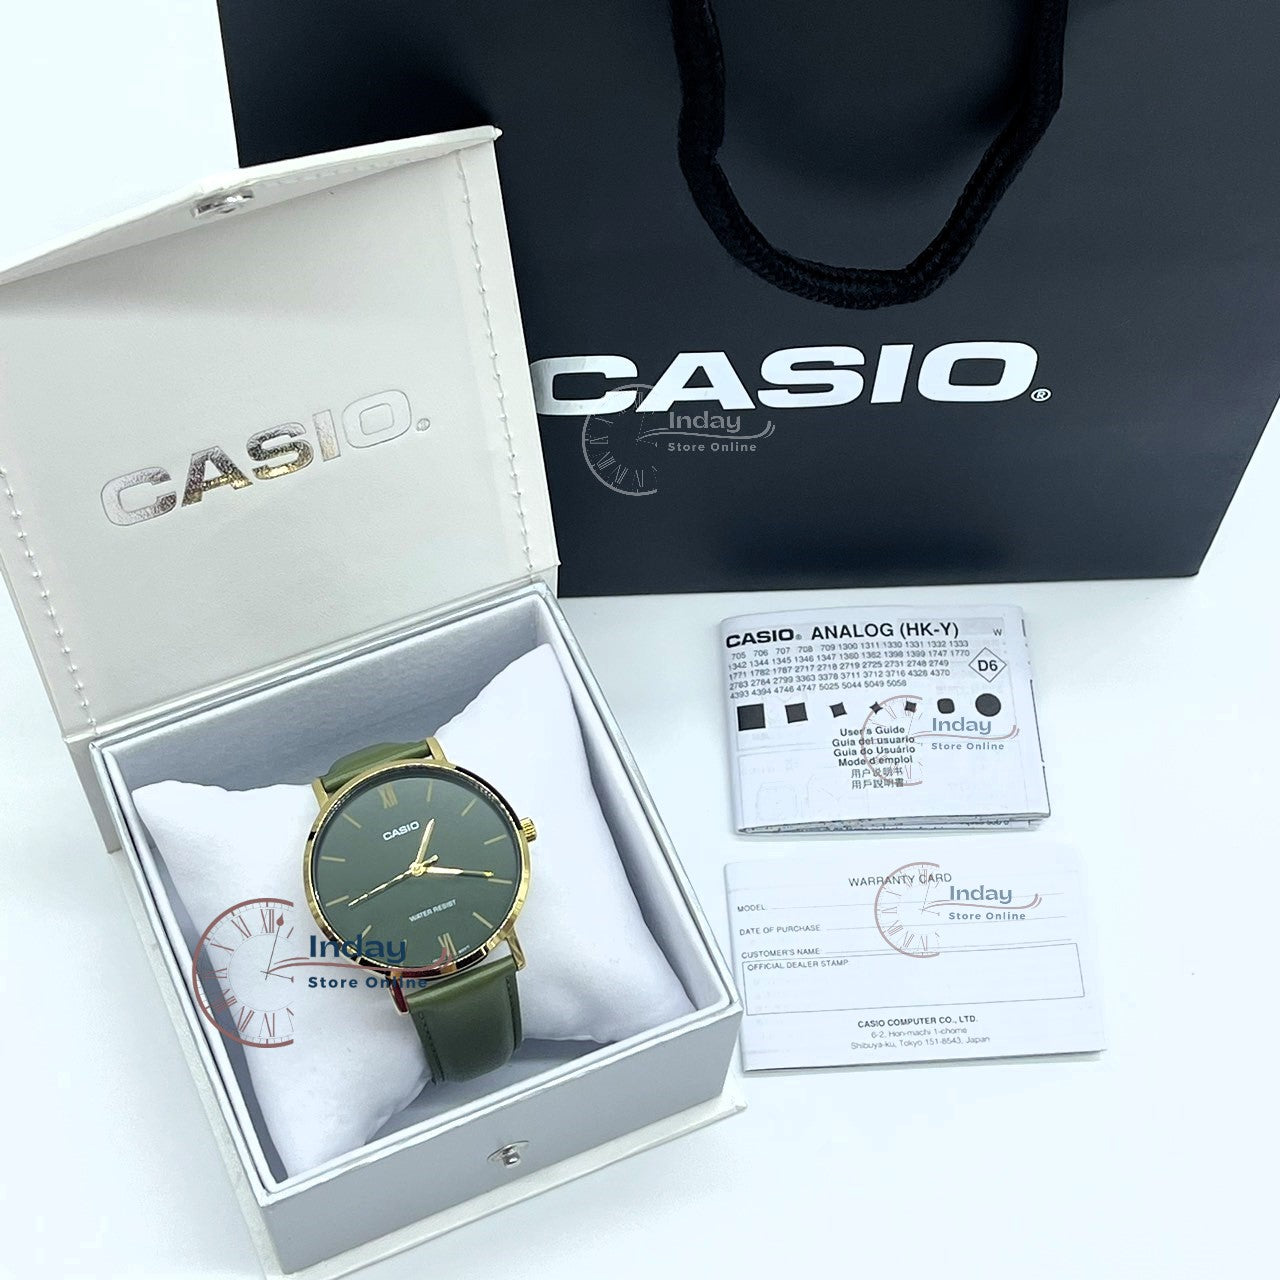 Casio Standard Men's Watch MTP-VT01GL-3B Analog Green Color Leather Band Mineral Glass